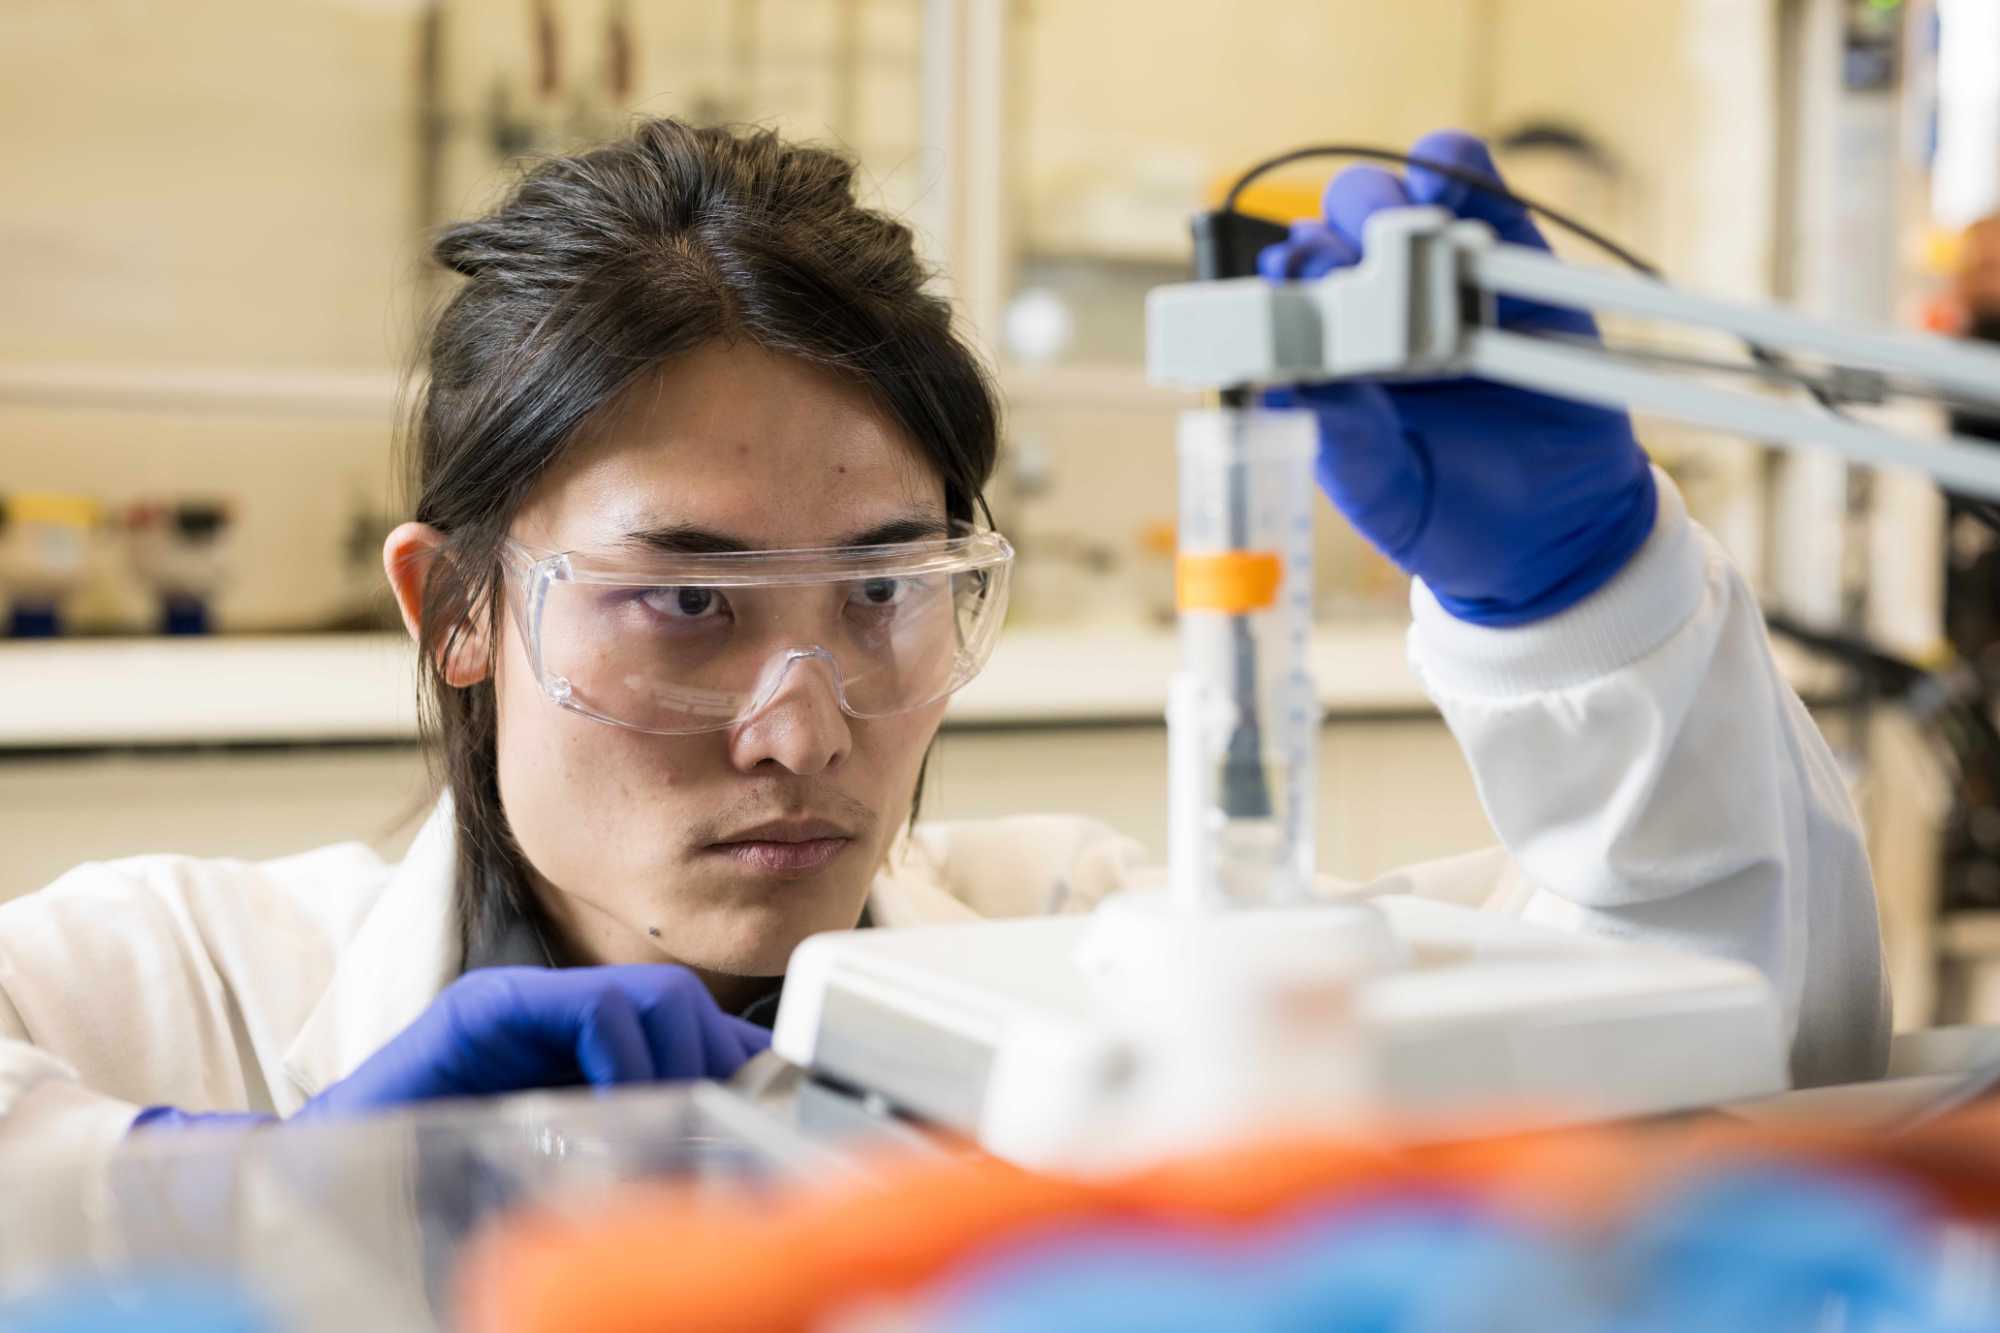 A scientist wearing lab googles and gloves examines a beaker of water containing PFAS chemicals.